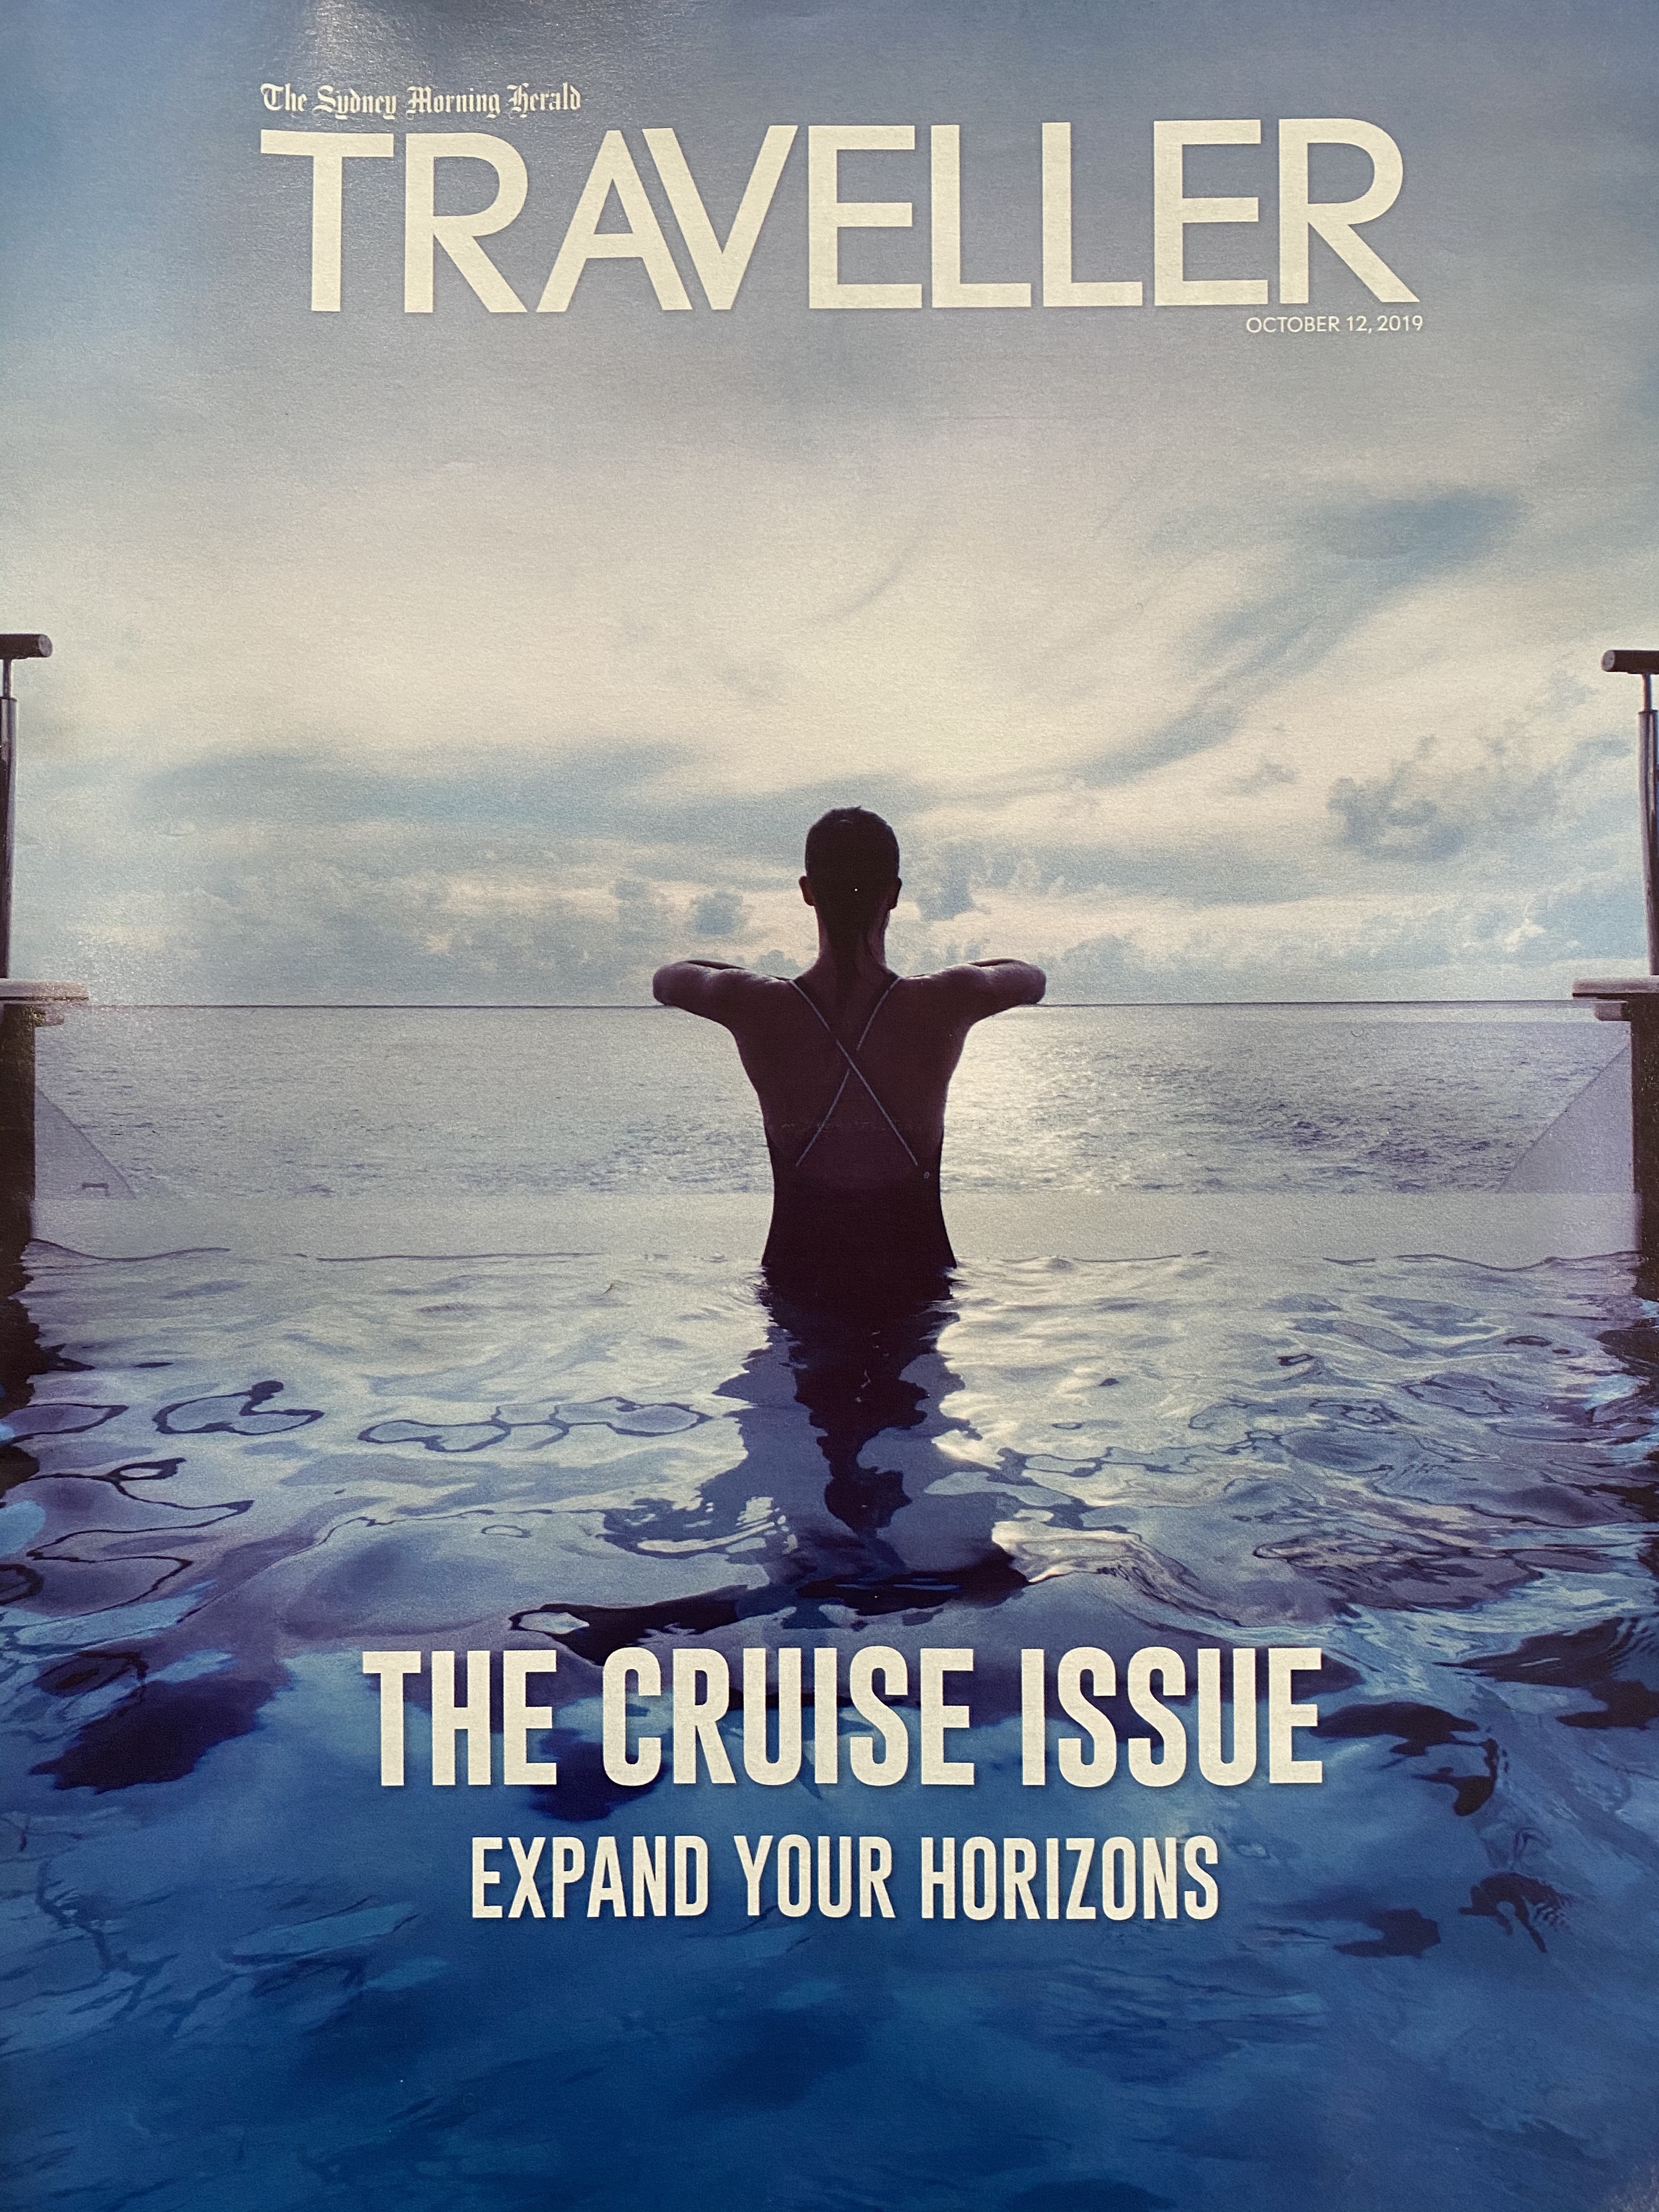 SMH Traveller - OCT 12 2019, The cruise issue 